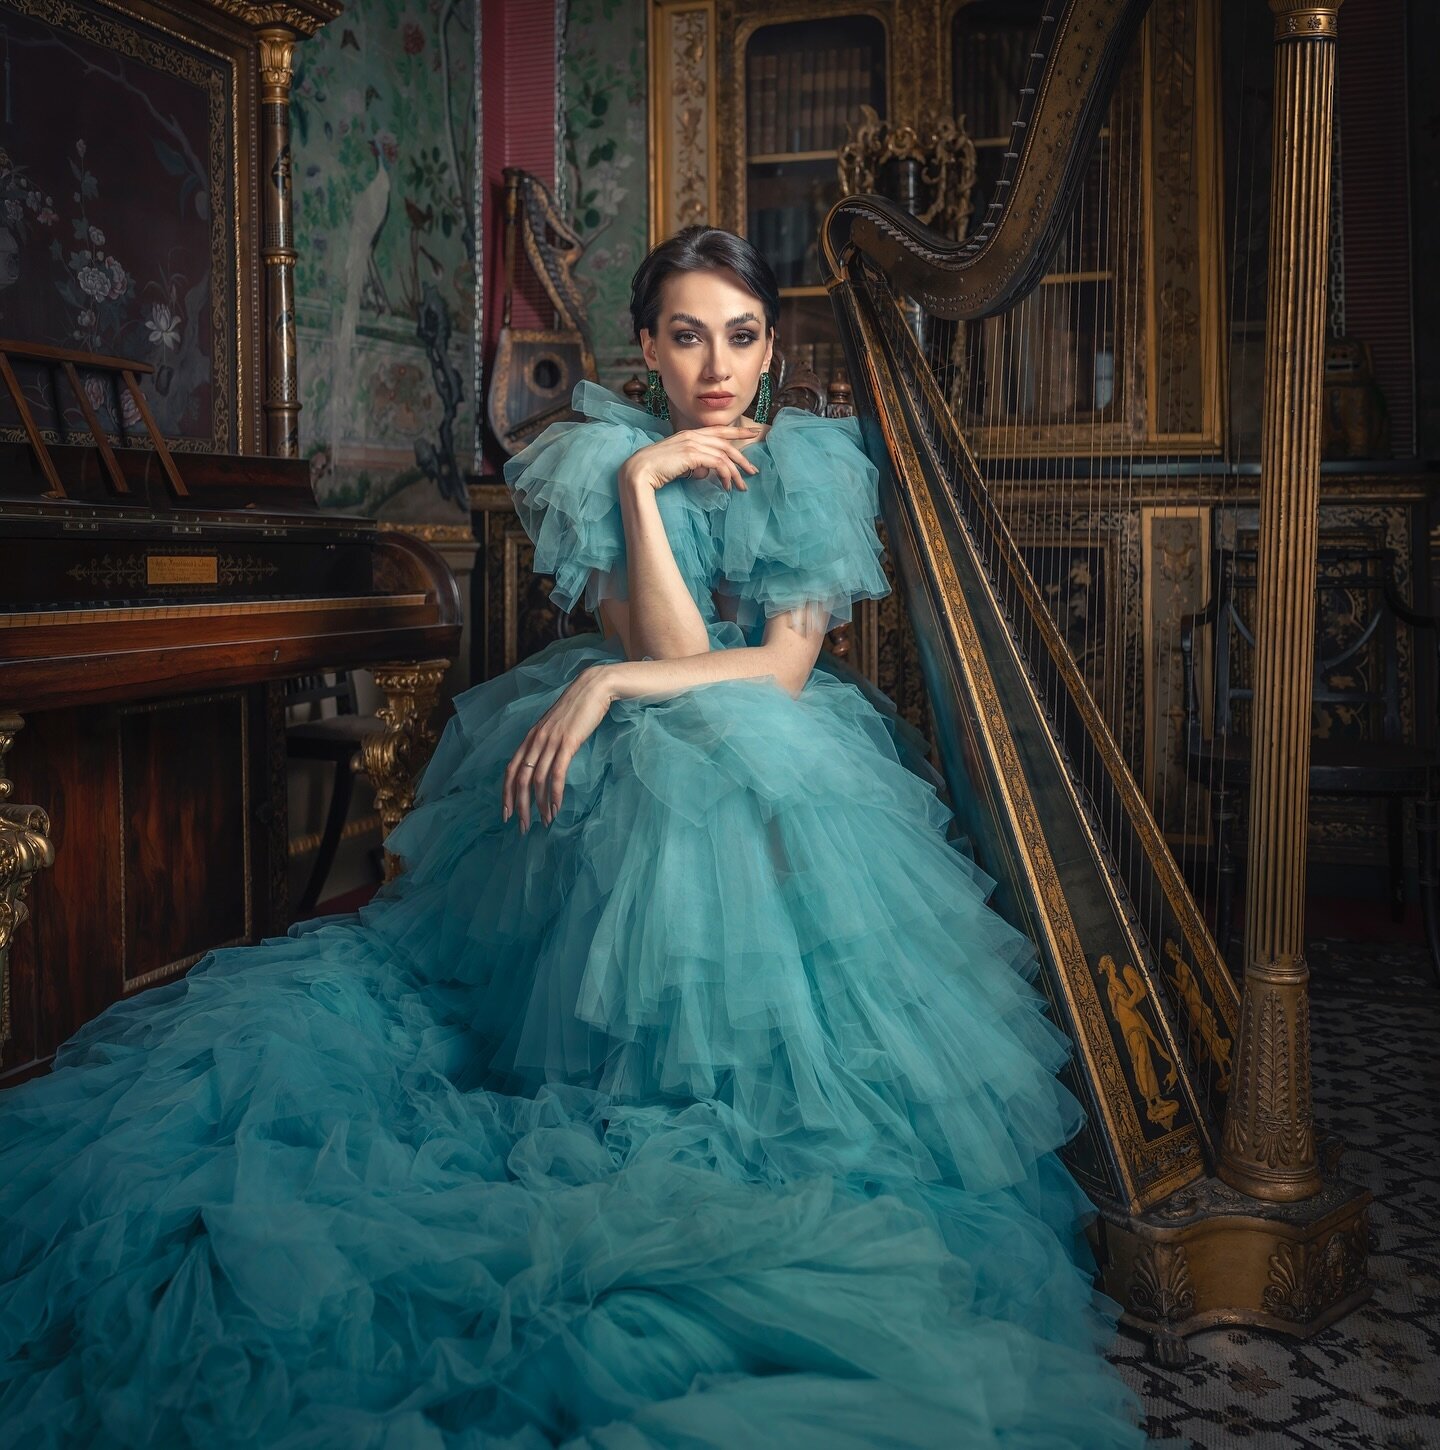 A portrait of model Xenia at the stately home Temple Newsam near Leeds. The Chinese Room in the hall made an incredible setting for high fashion portraits. Styling by Tabitha Boydell

#fashionportrait #stateleyhome #portraitphotography #portraitphoto